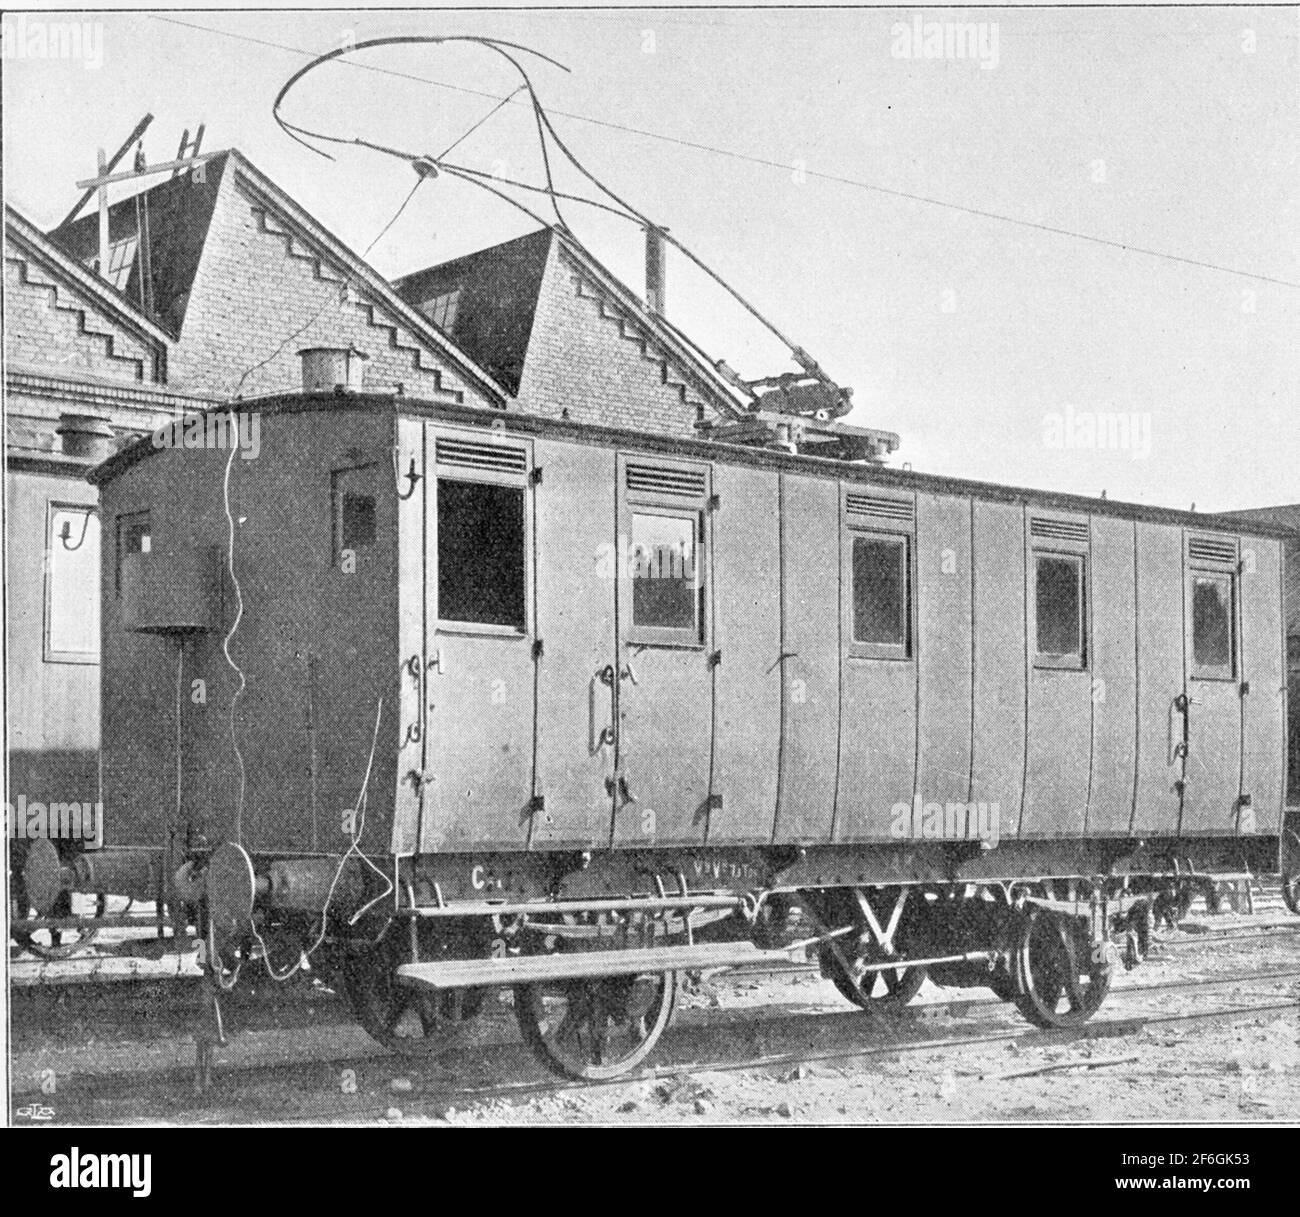 The state railways, SJ Test Motor trailer from ASeadsa Motor cars was a forward development of single-phase engines under the management of the engineer Ernst Danielsson. During 1905, the engine for rail operation was manufactured under his management. These engines had the type designation in 25. Vid the engine had the effect 18KW at 500V and 25Hz. The engines are cliented both with DC and ENFA's AC power. These engines were built in 1806 together with transformer and other technical equipment into monvåaxlad passenger car from SJ C6A. The main transformer in this carriage is dimensioned for Stock Photo